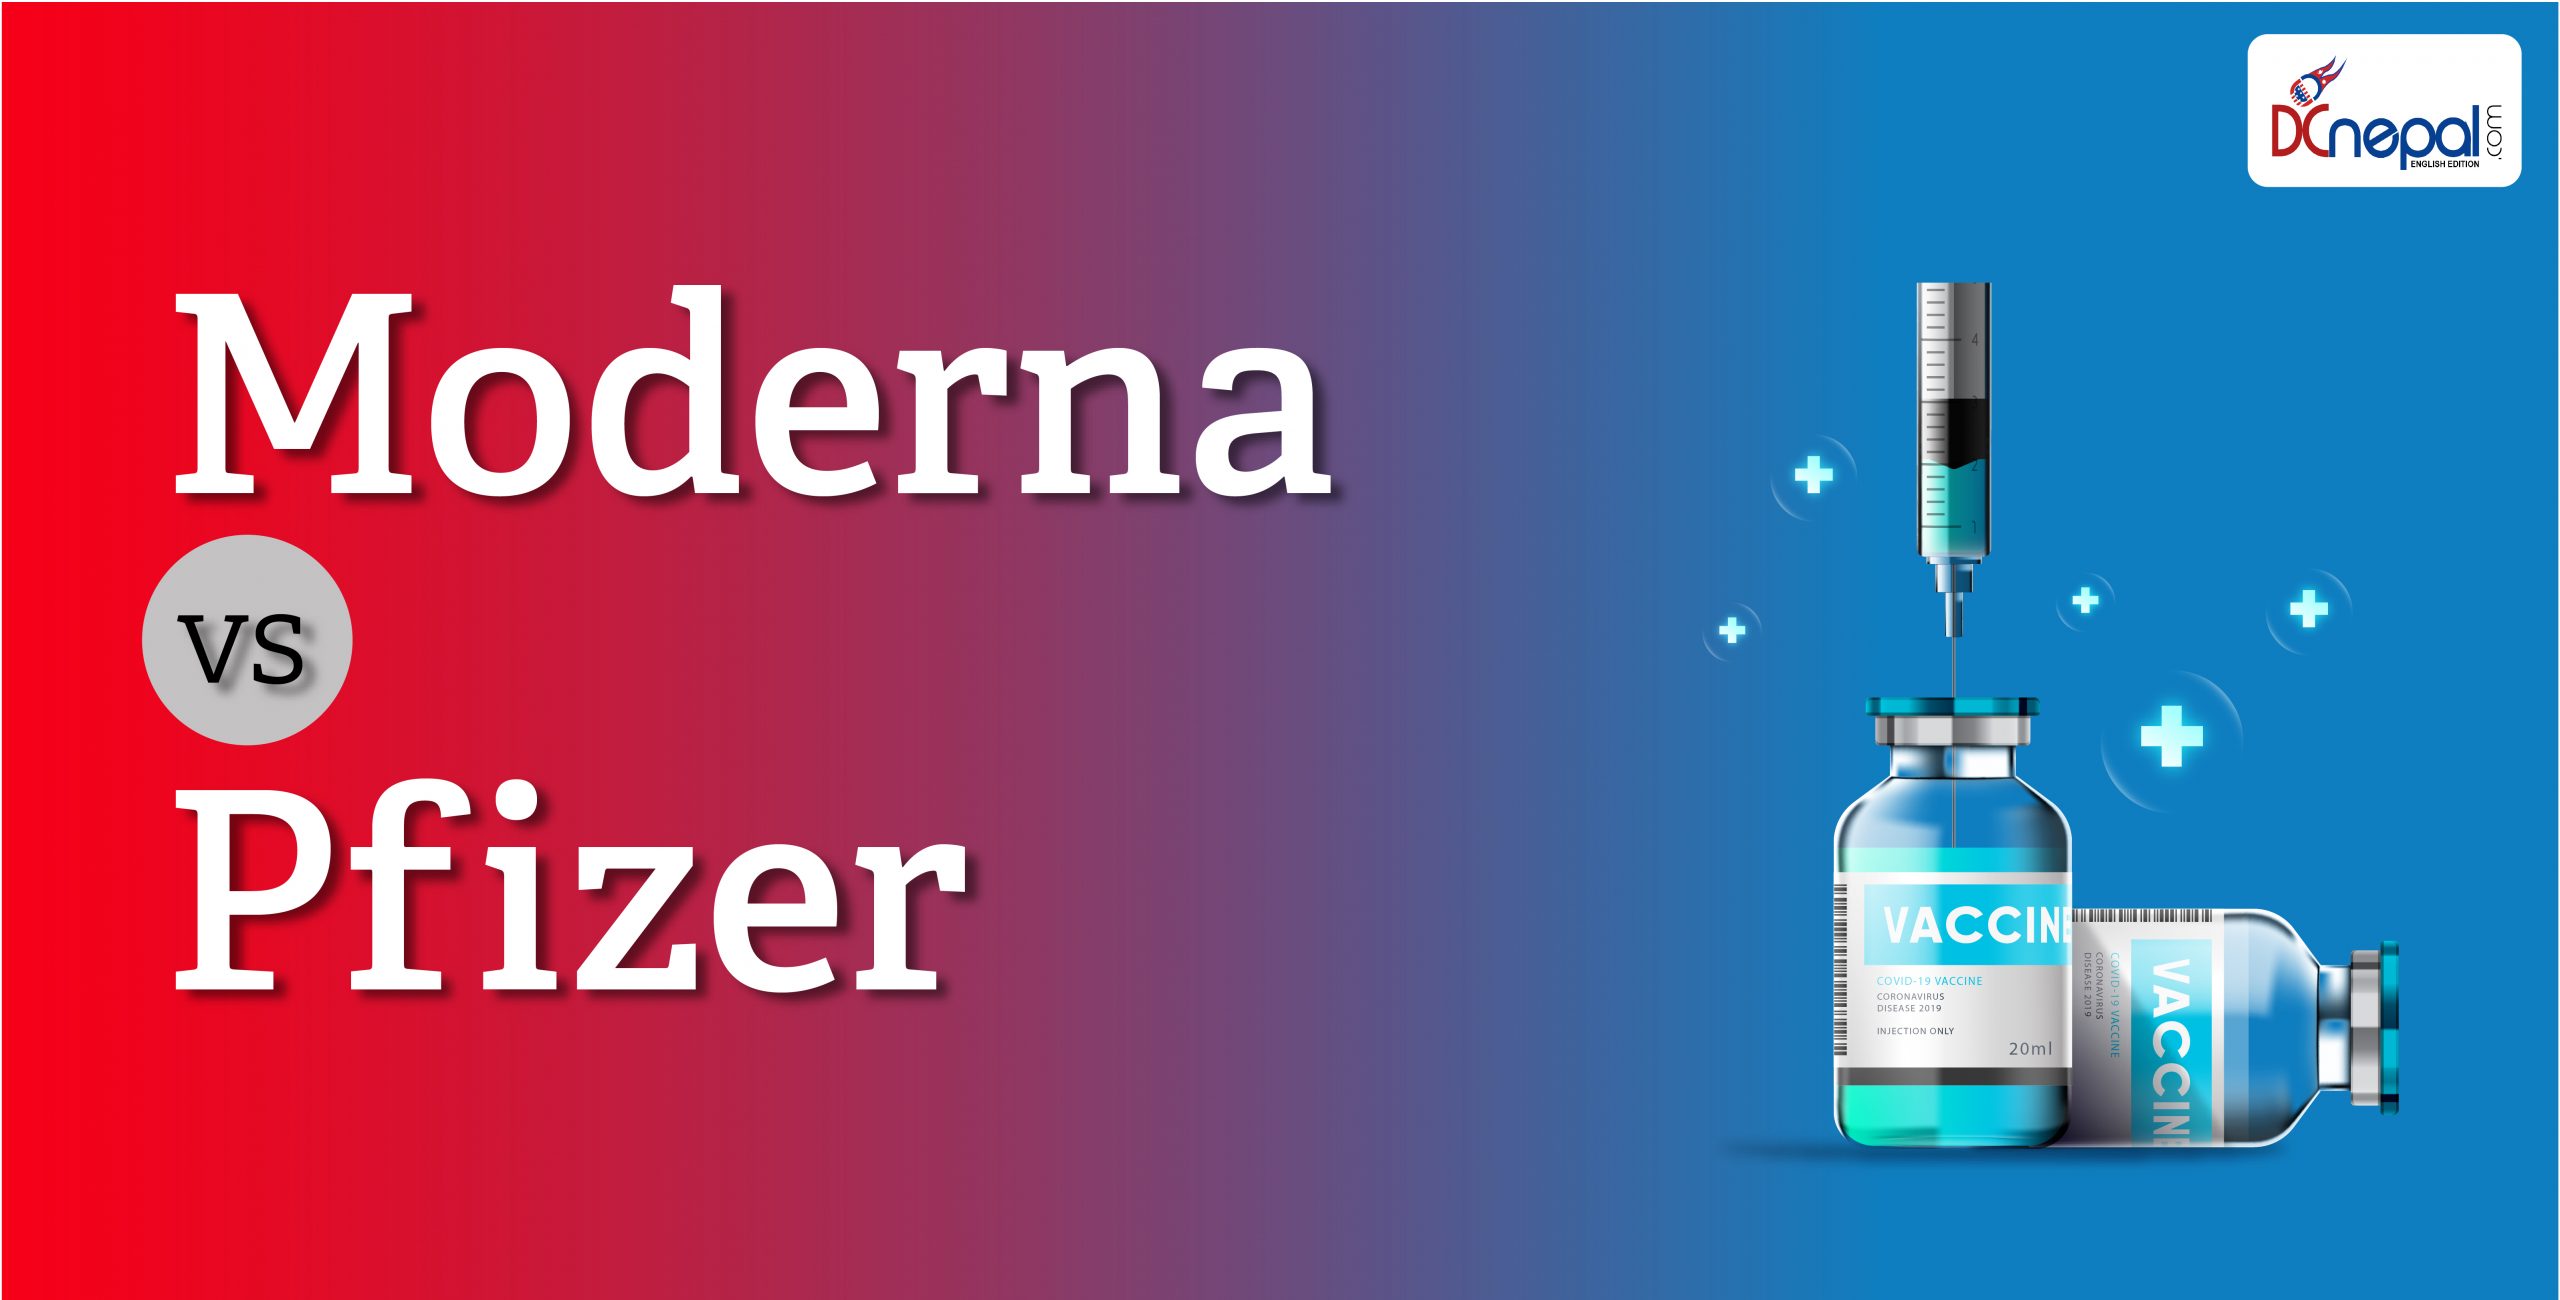 Here is why Moderna is better than Pfizer vaccine - DCnepal